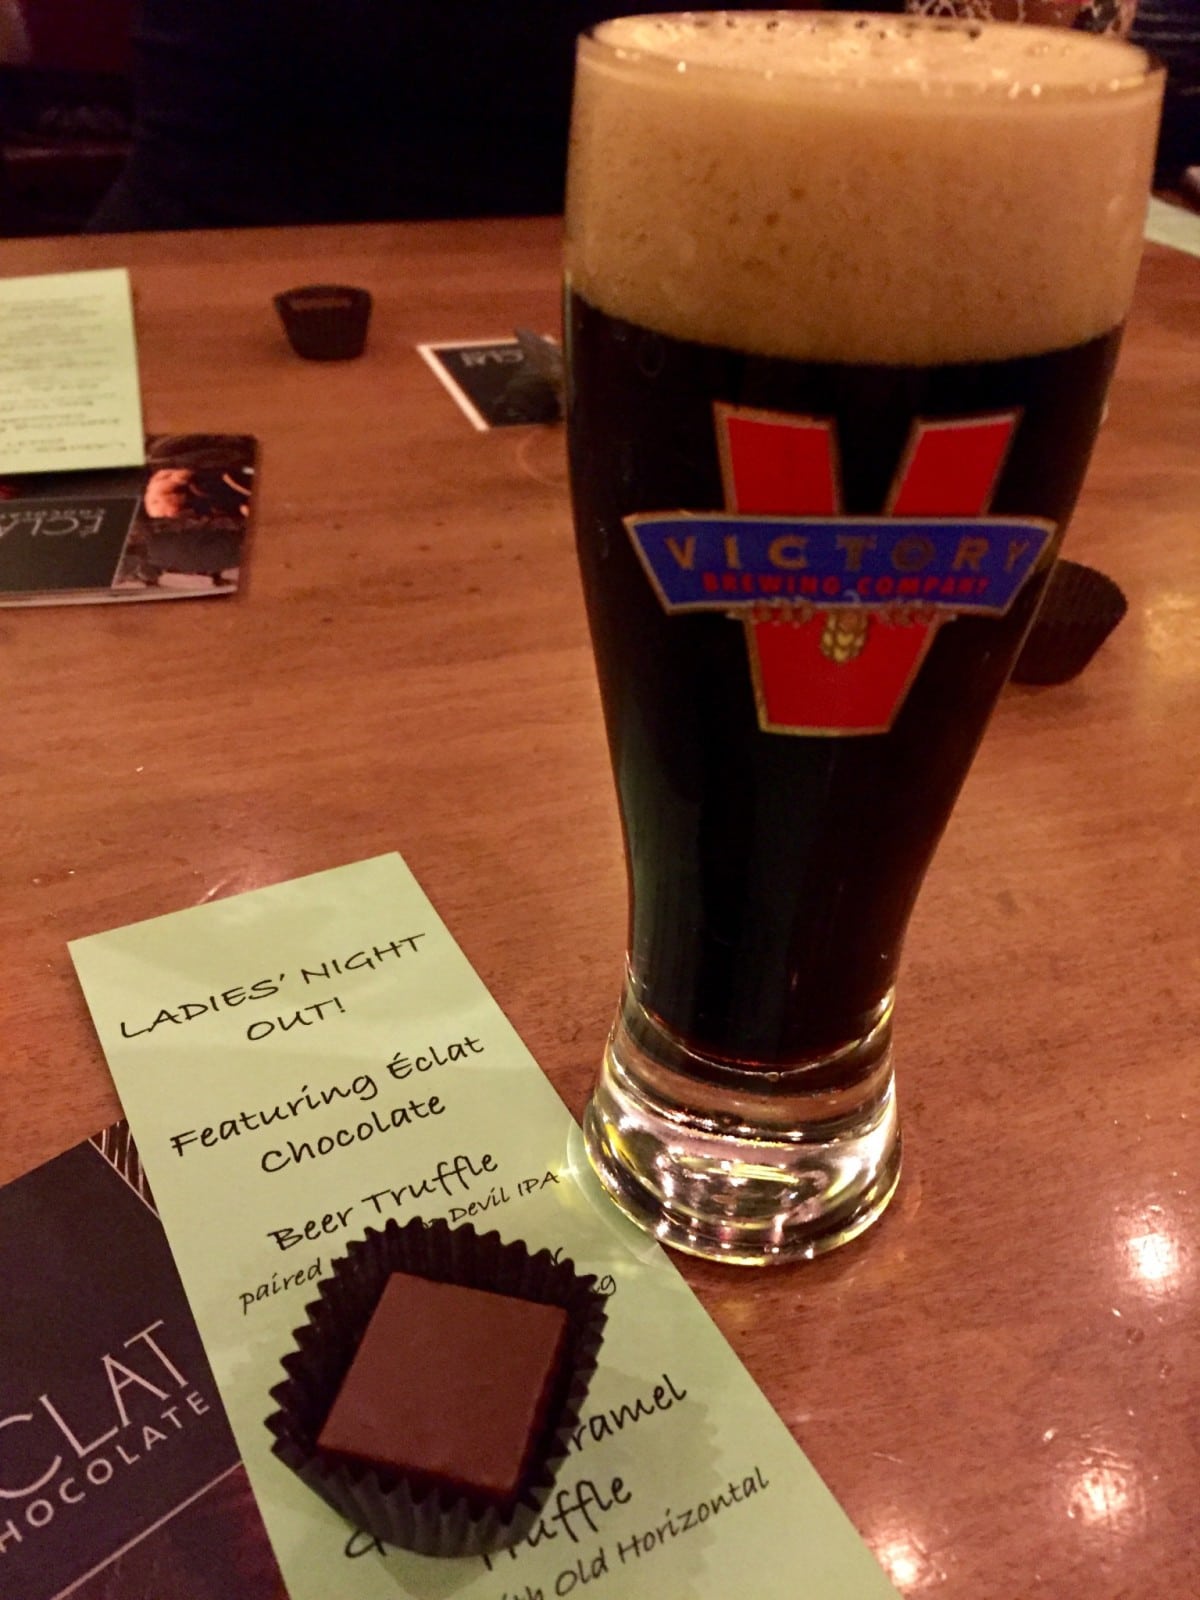 Victory beer and Eclat chocolates